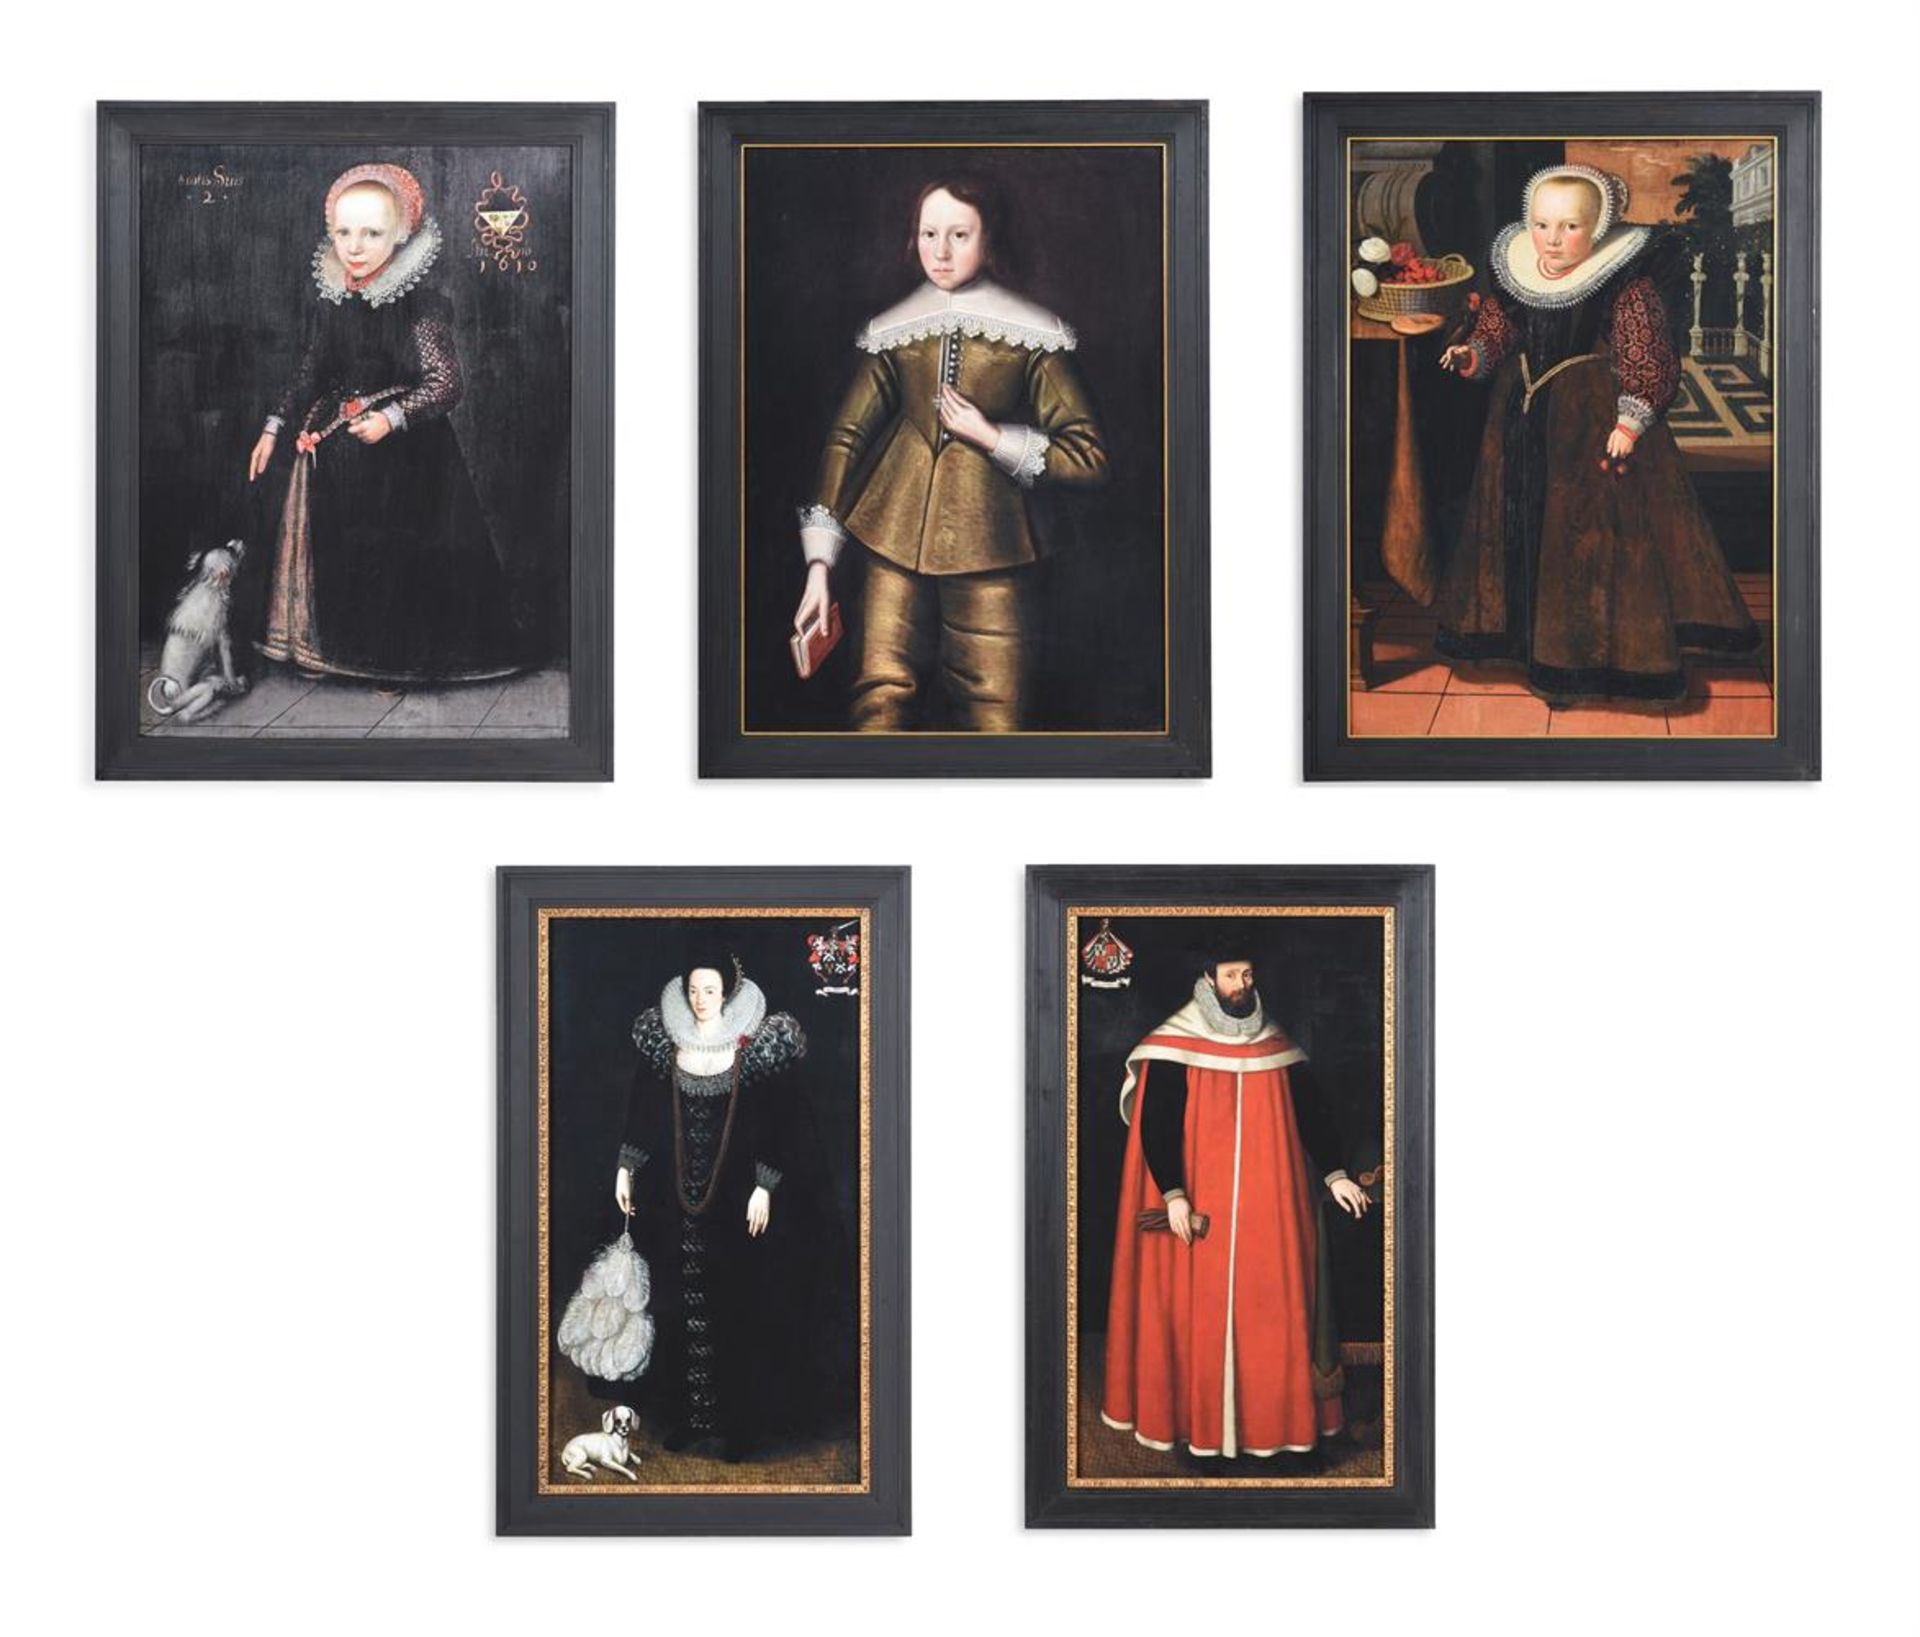 A COLLECTION OF EIGHT FRAMED PHOTOGRAPHIC REPRODUCTIONS, AFTER 16TH AND 17TH CENTURY PORTRAITS